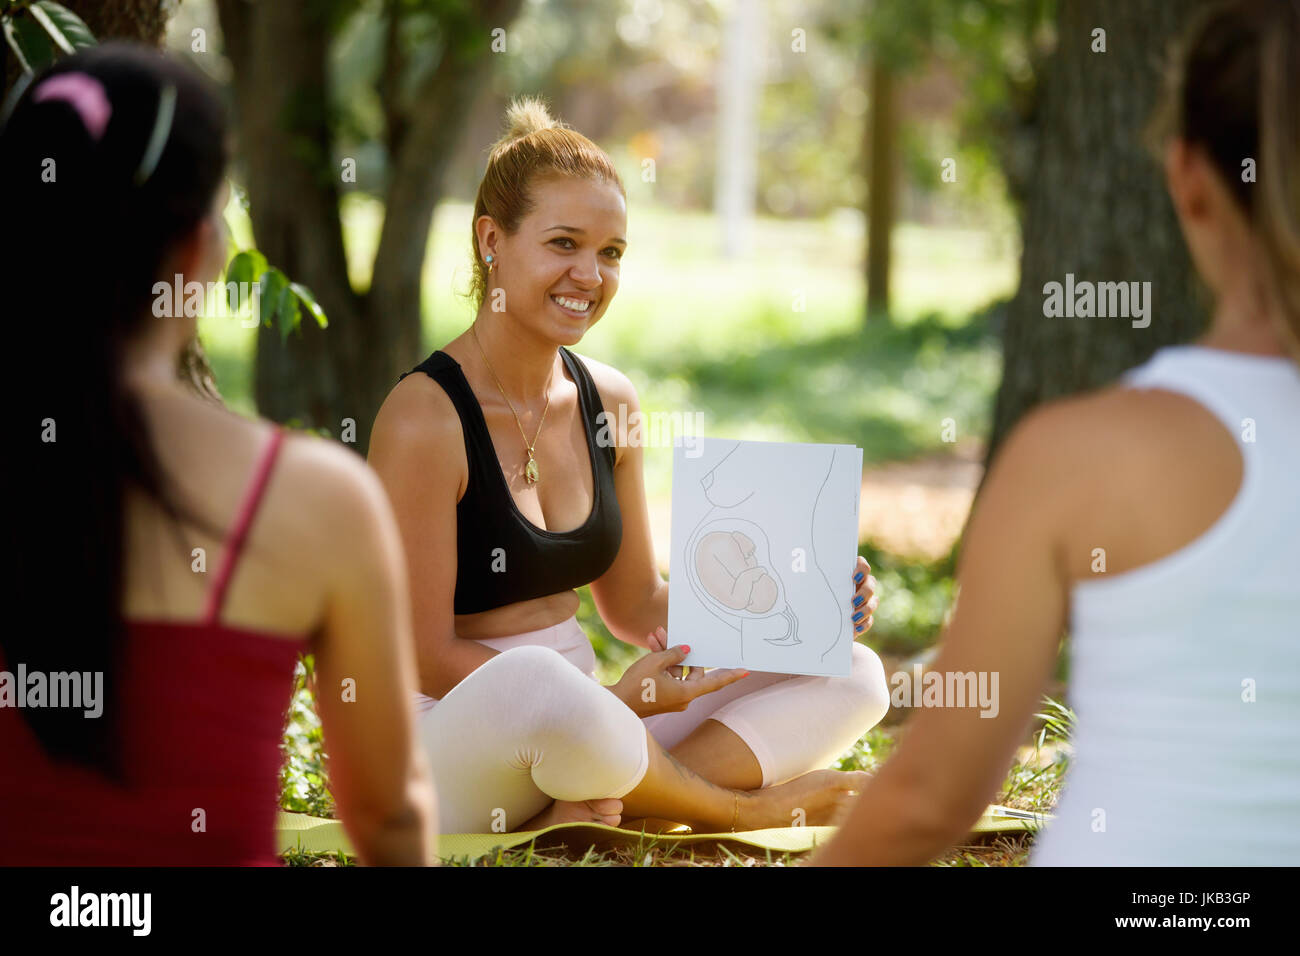 Pregnant women taking prenatal lesson in park. Teacher explaining baby growth inside belly with pictures and drawings. Stock Photo